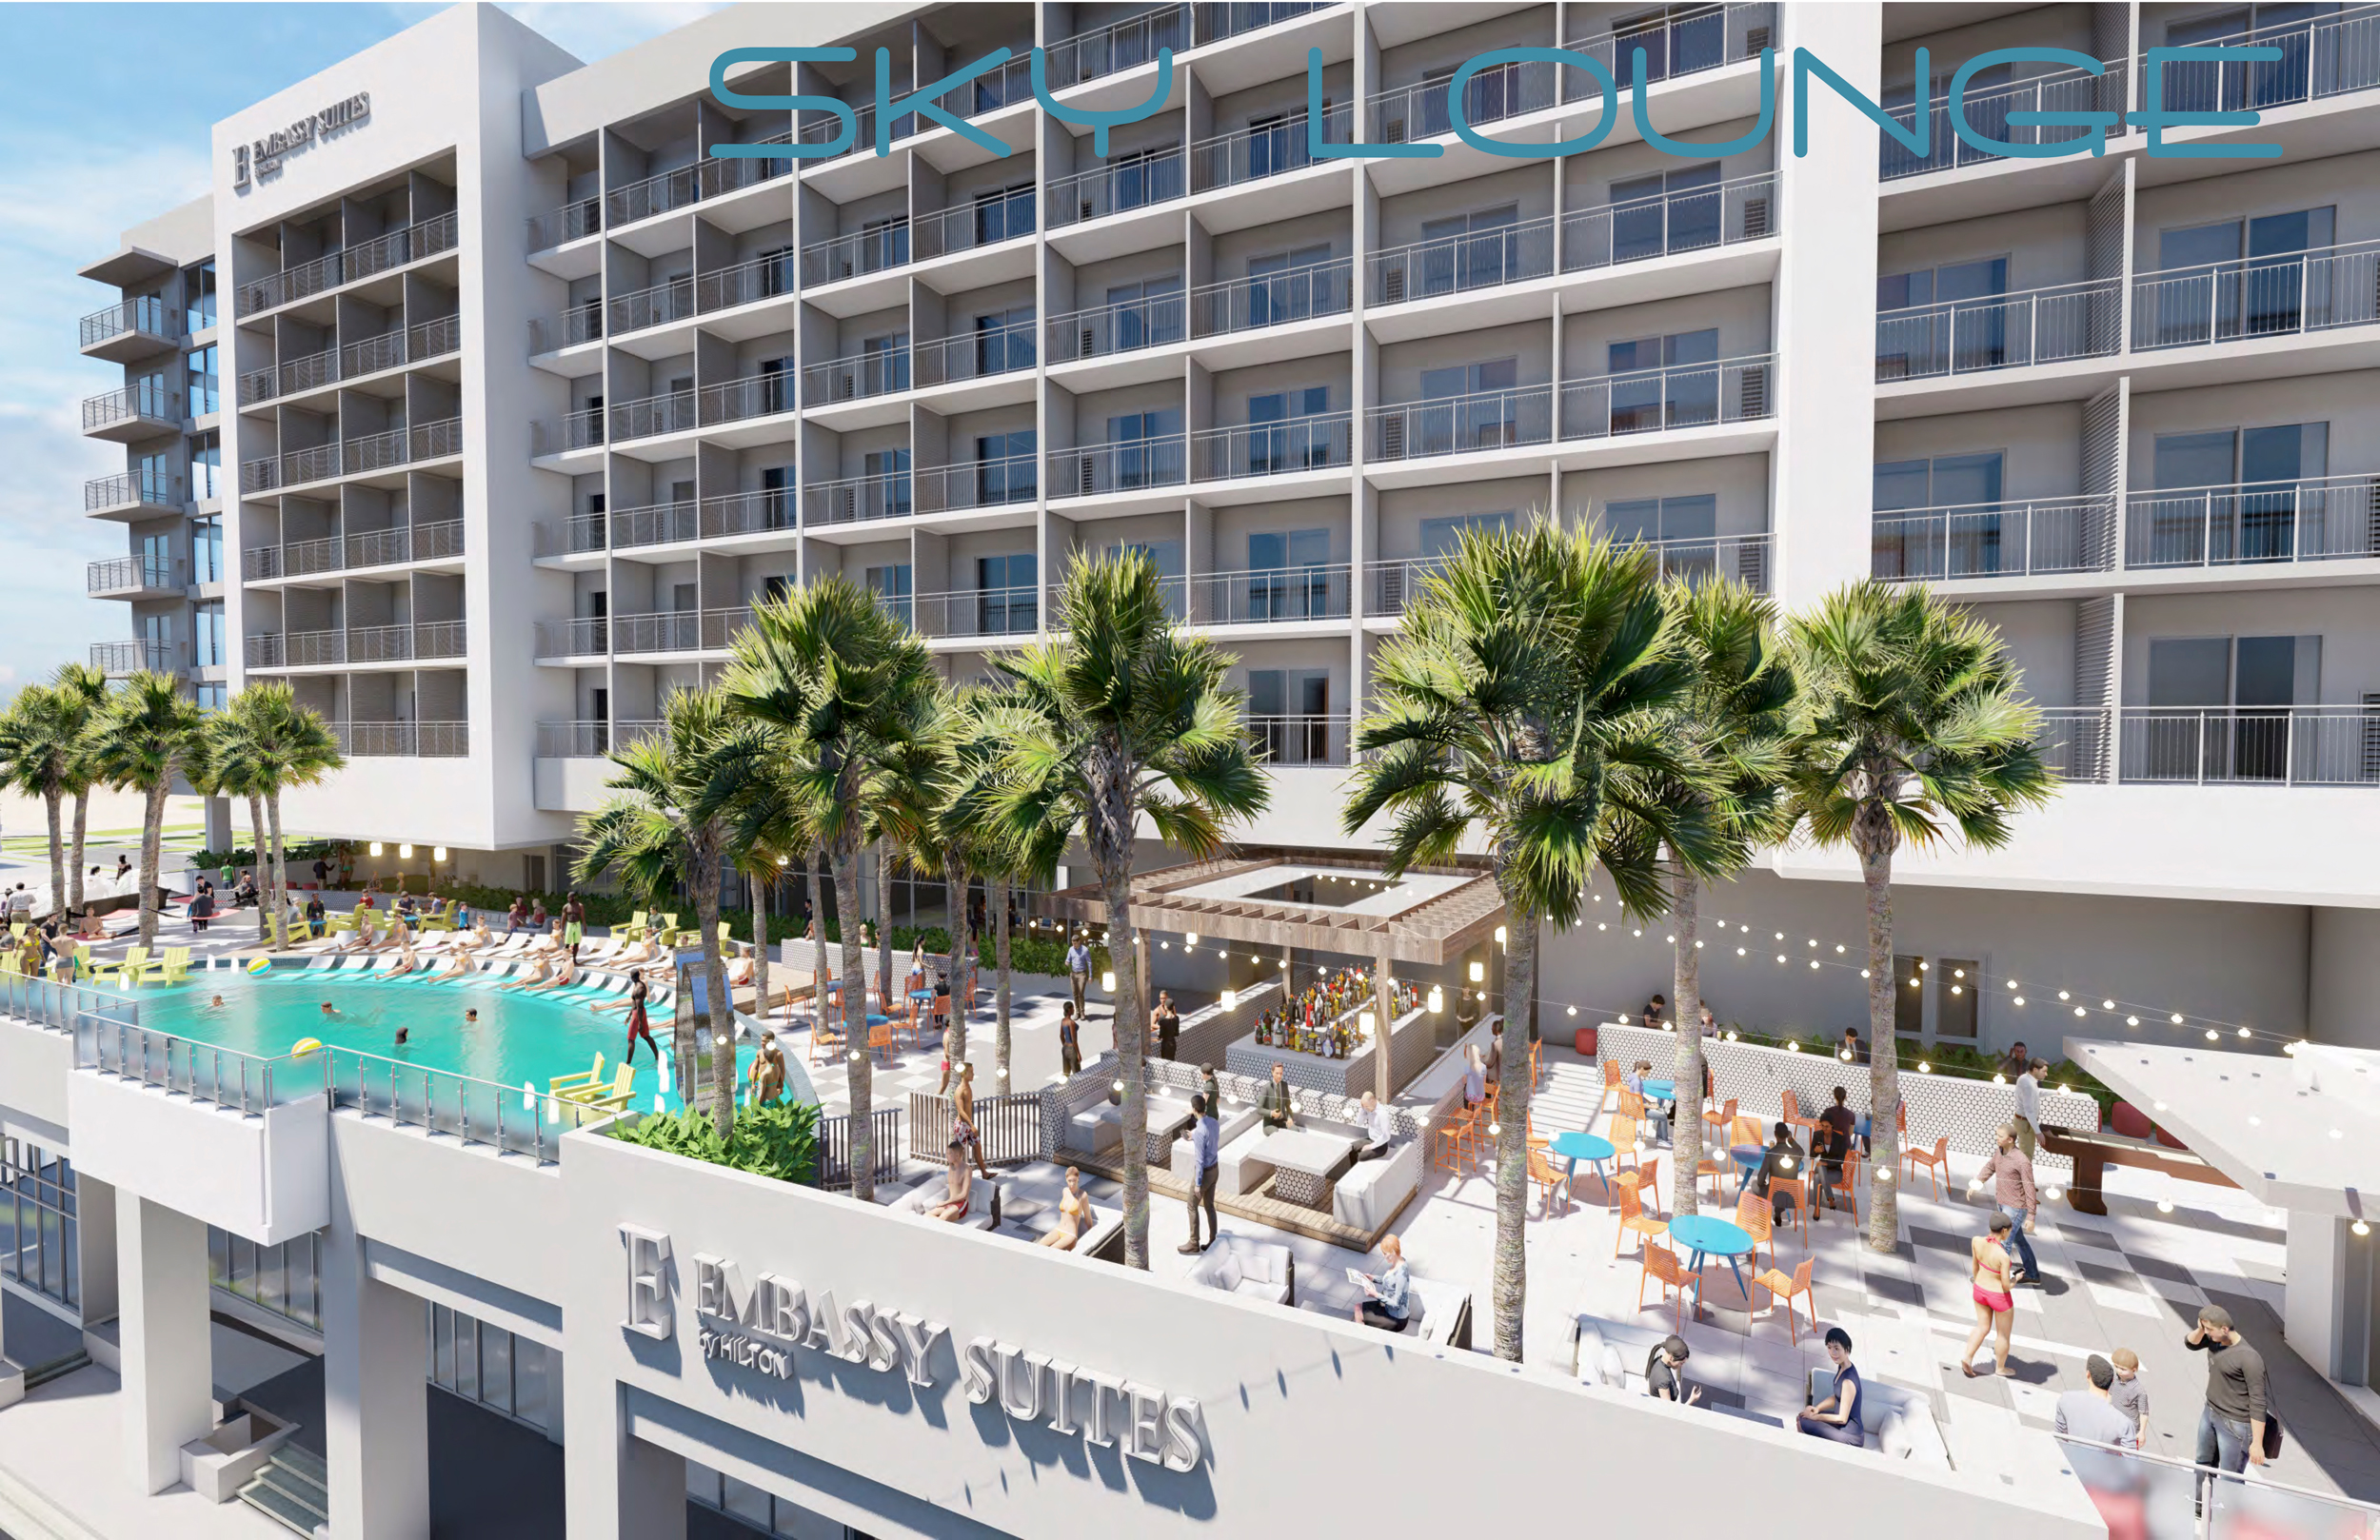 Embassy Suites Gulf Shores rendering